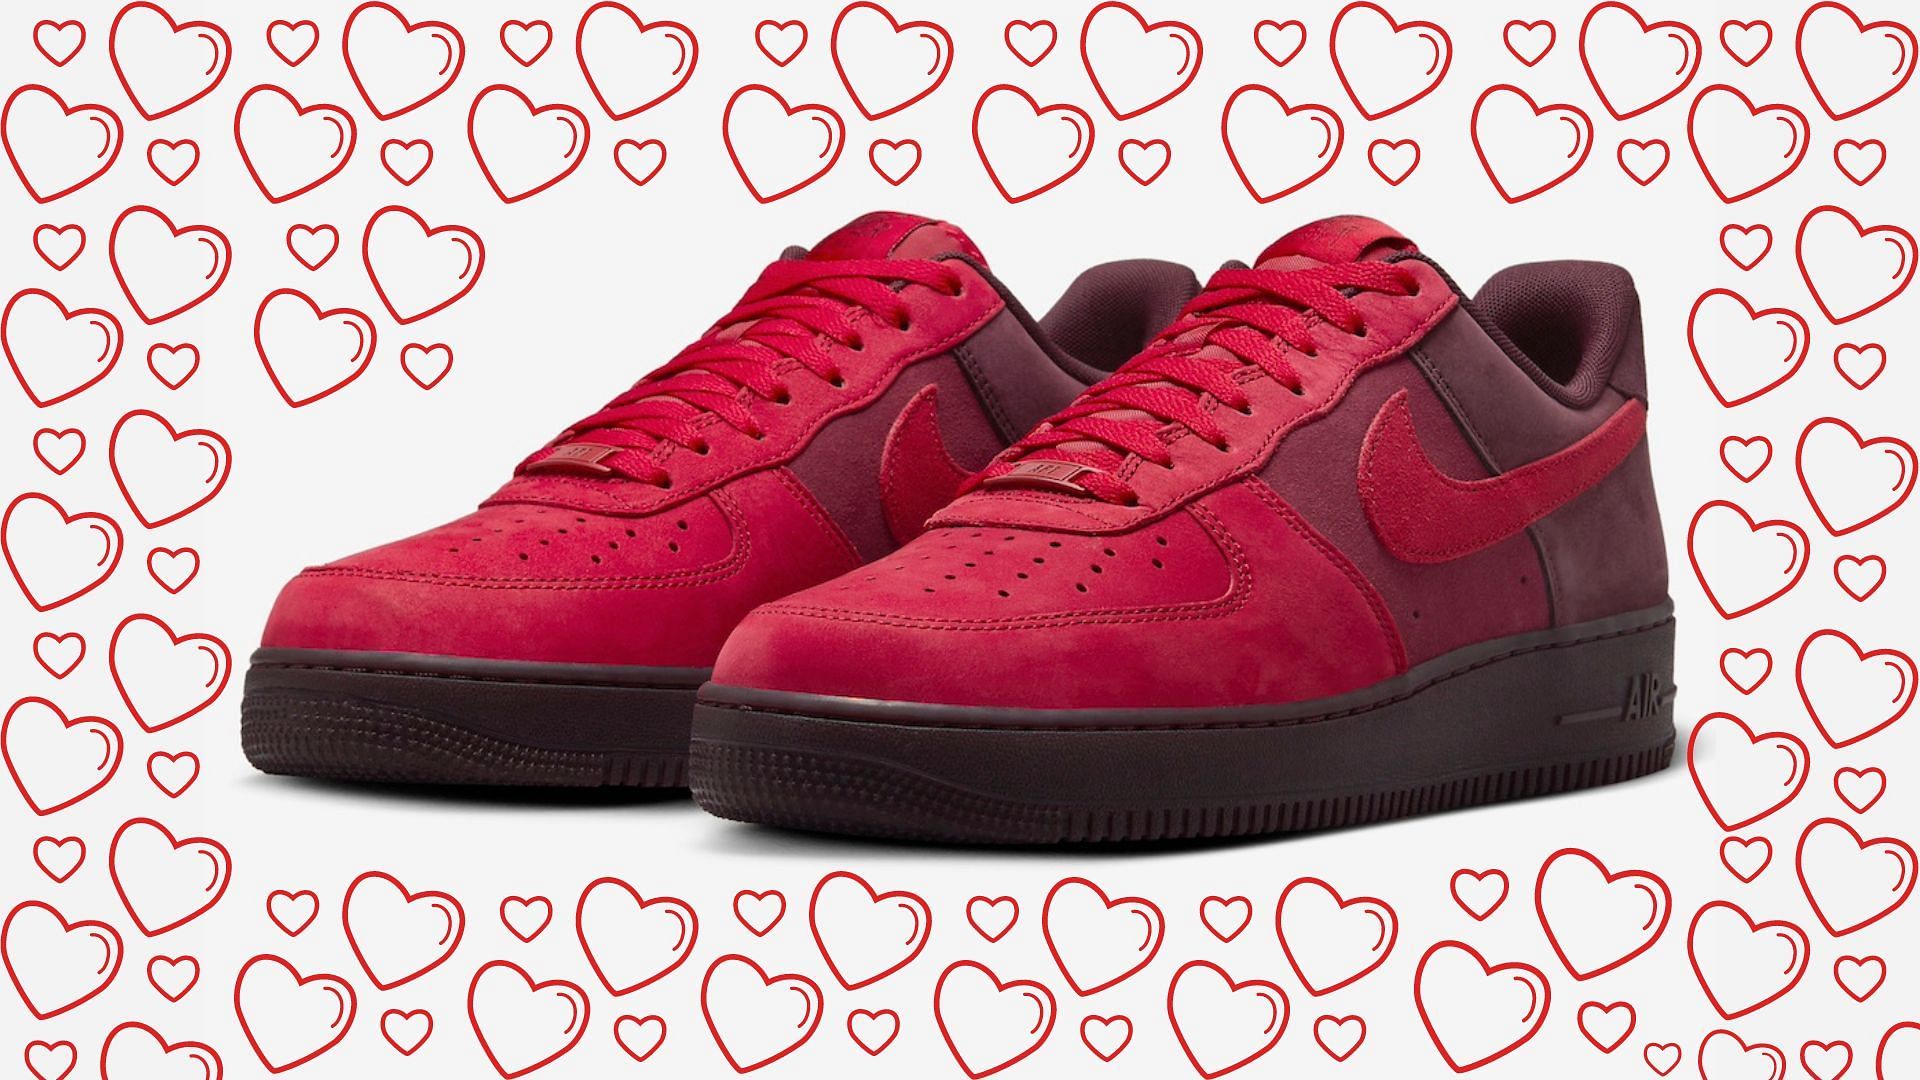 Nike Air Force 1 Low Layers of Love shoes (Image via Nike)